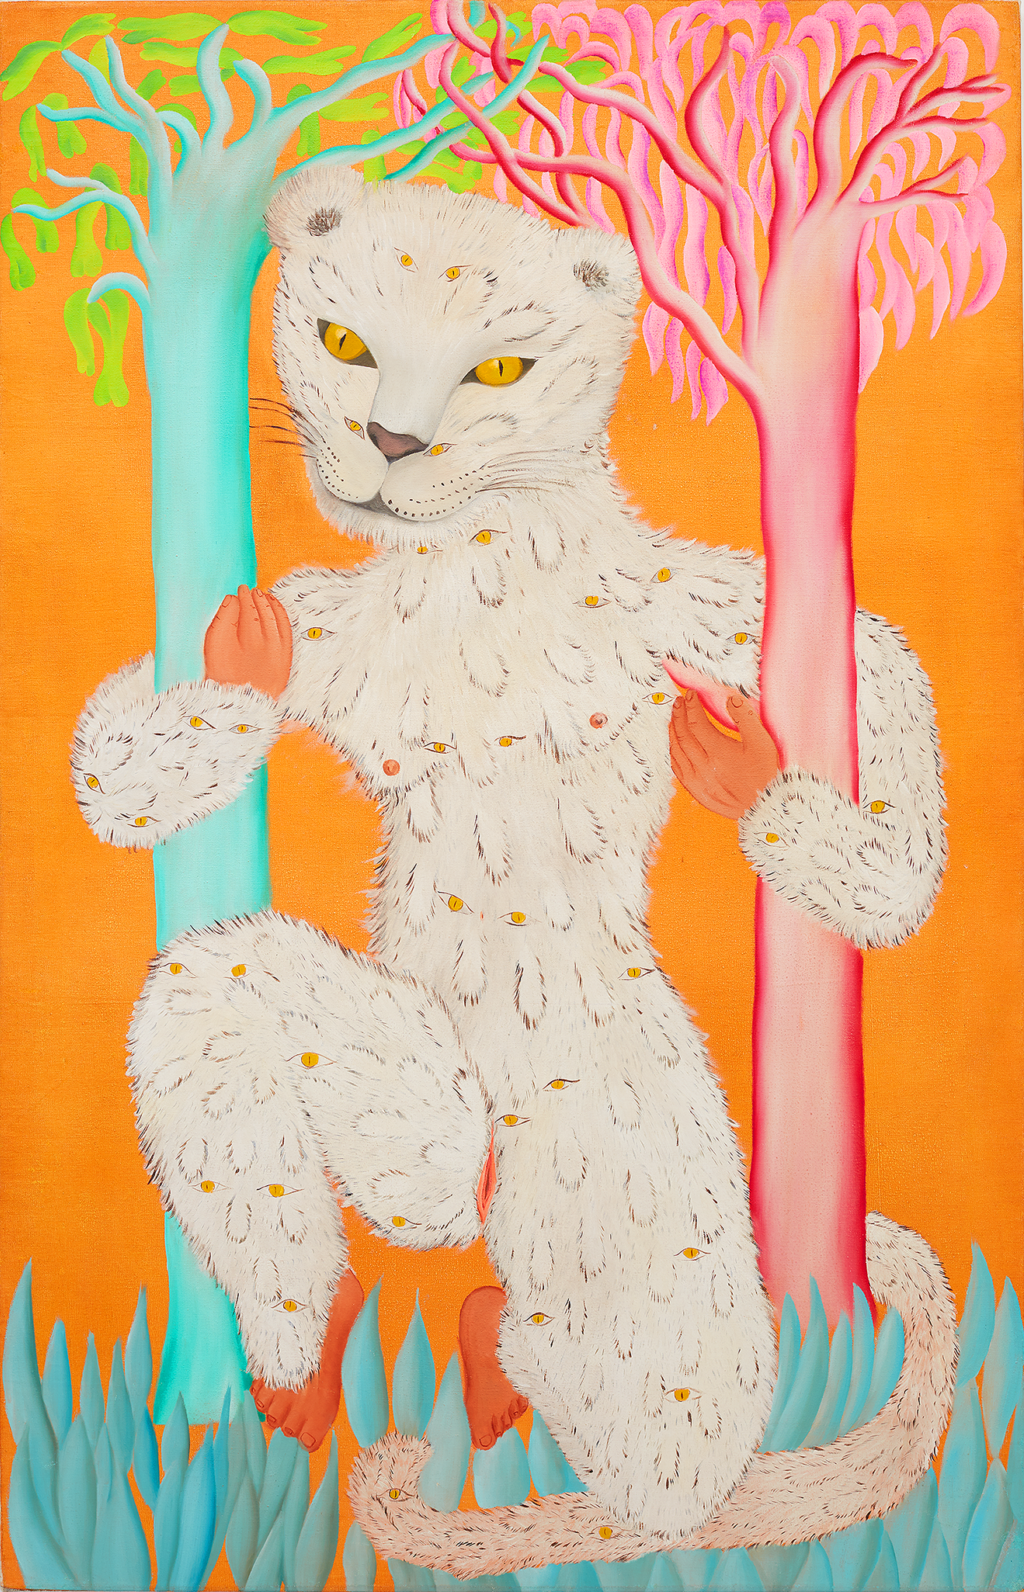 Artwork titled Leoparda de Ojitos. A humanoid leopard-like animal kneels between two small trees. The image is drawn with bright, neon colors.